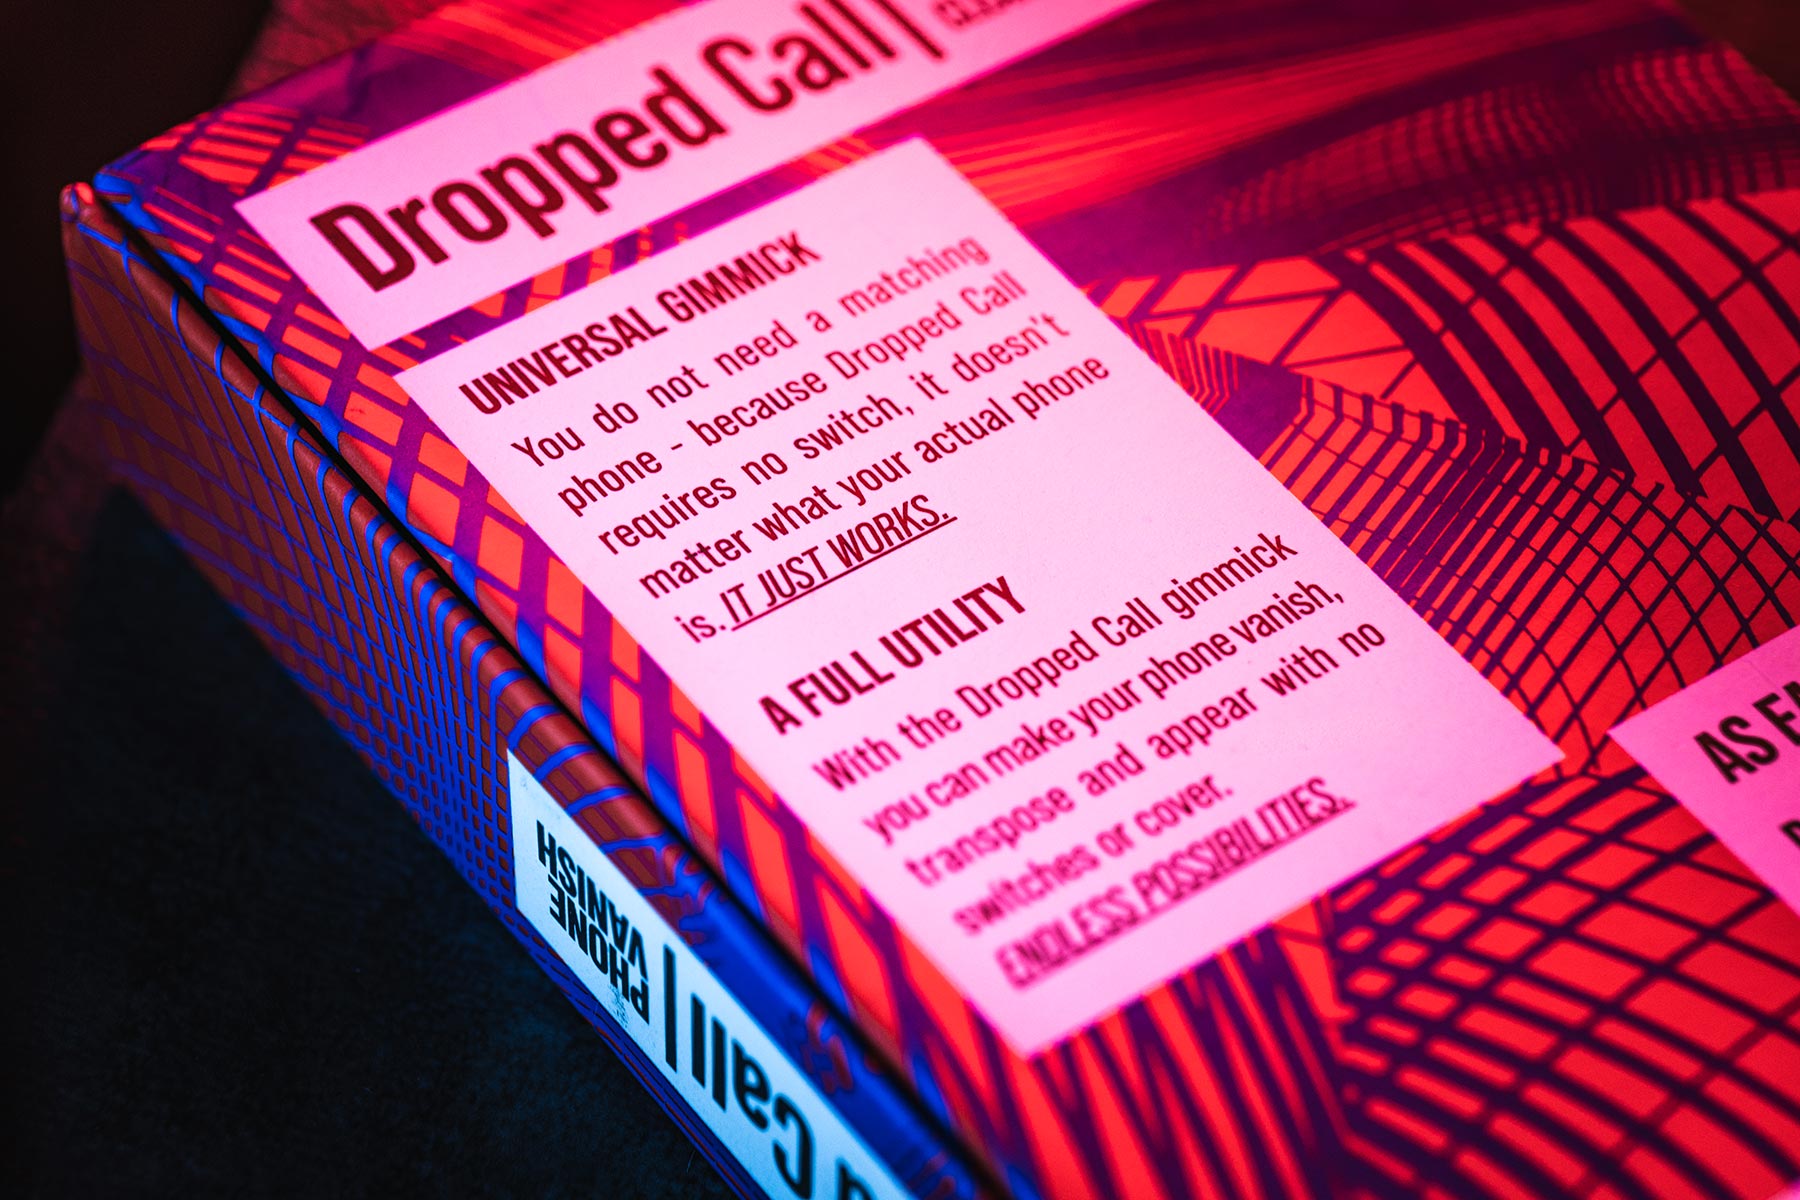 Dropped Call by Kyle Purnell & Zach Evans | Ellusionist